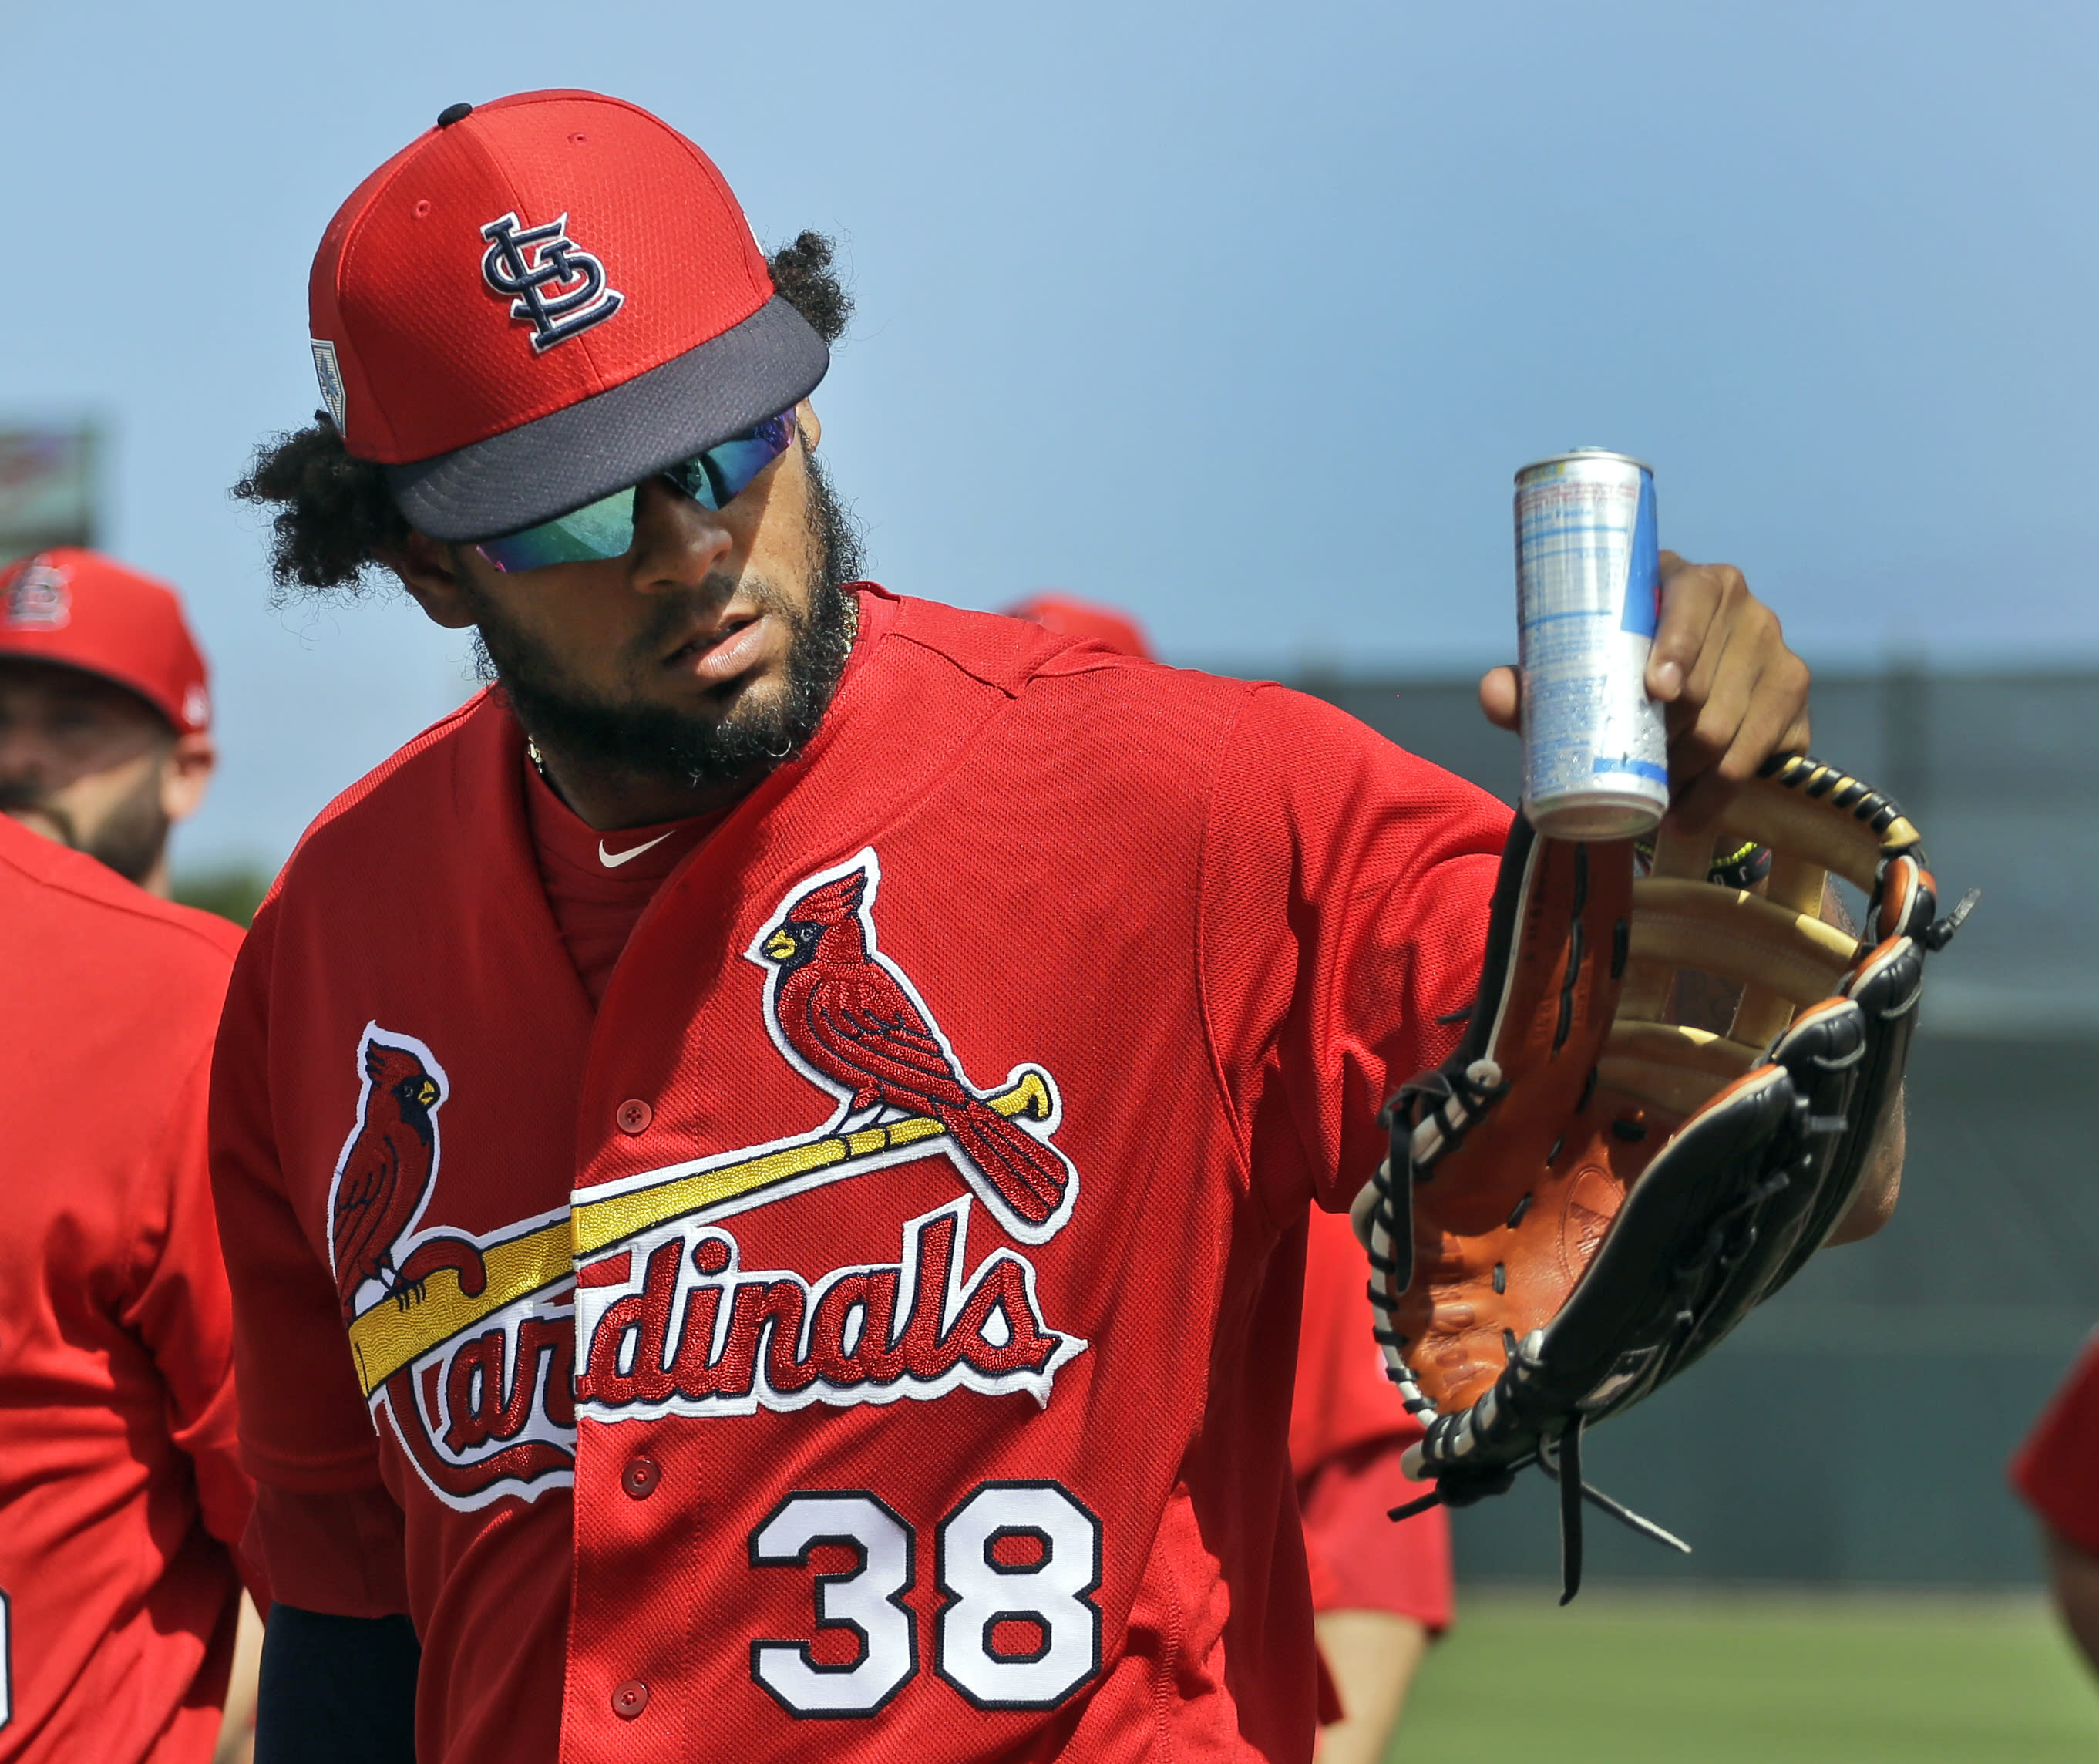 Cardinals sign Jose Martinez to $3.25M, 2-year contract